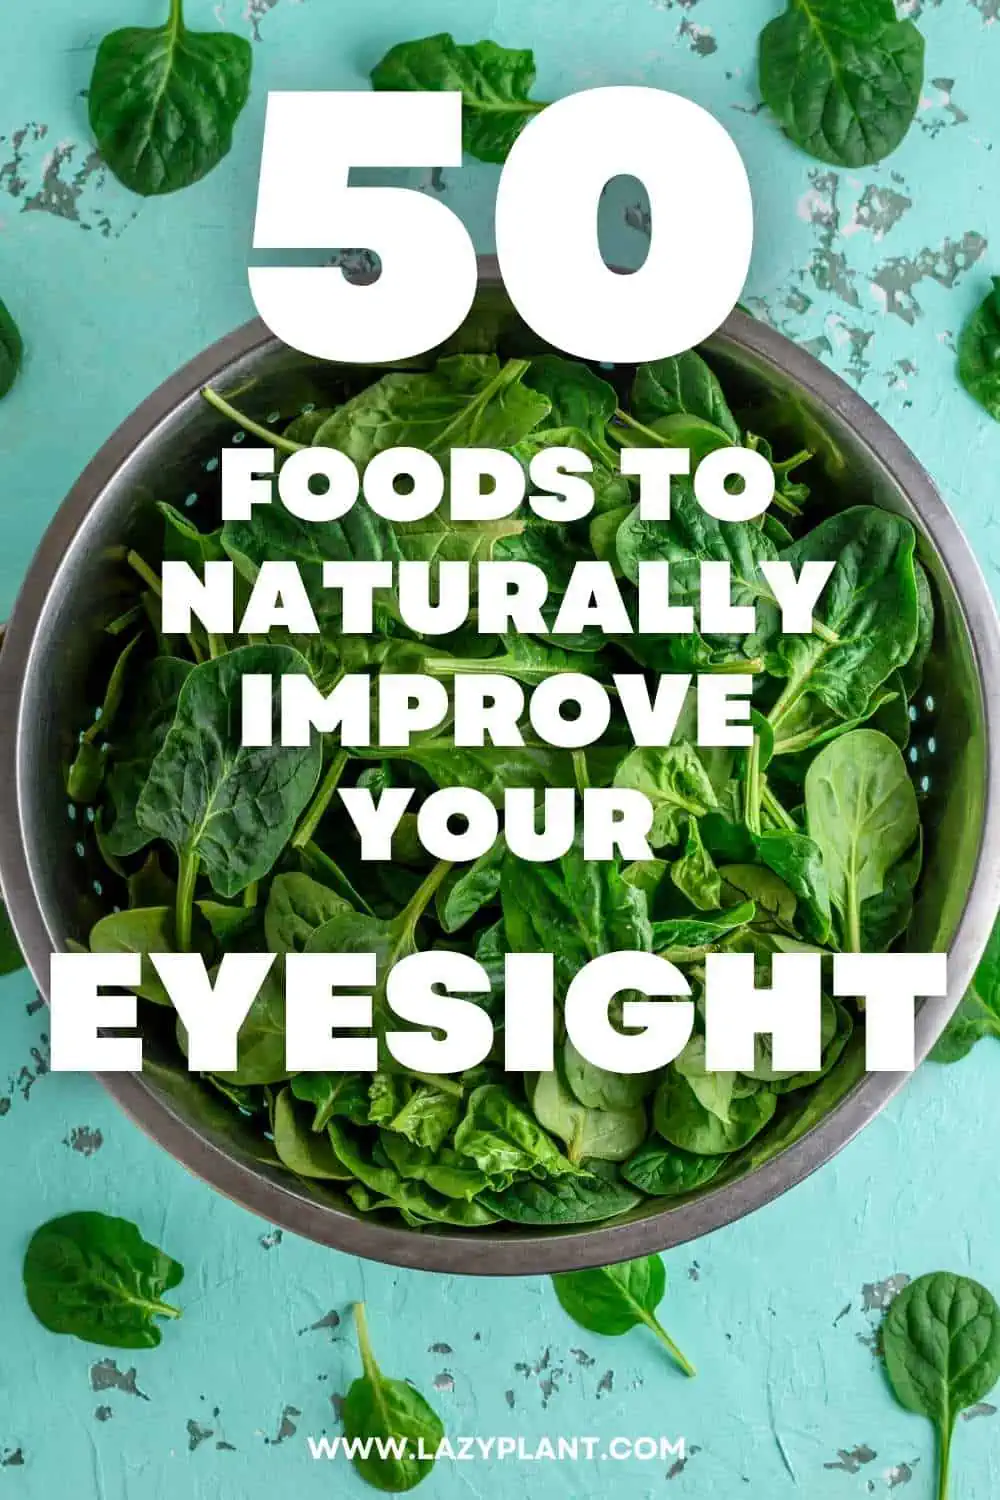 Which natural foods are known to improve eyesight?